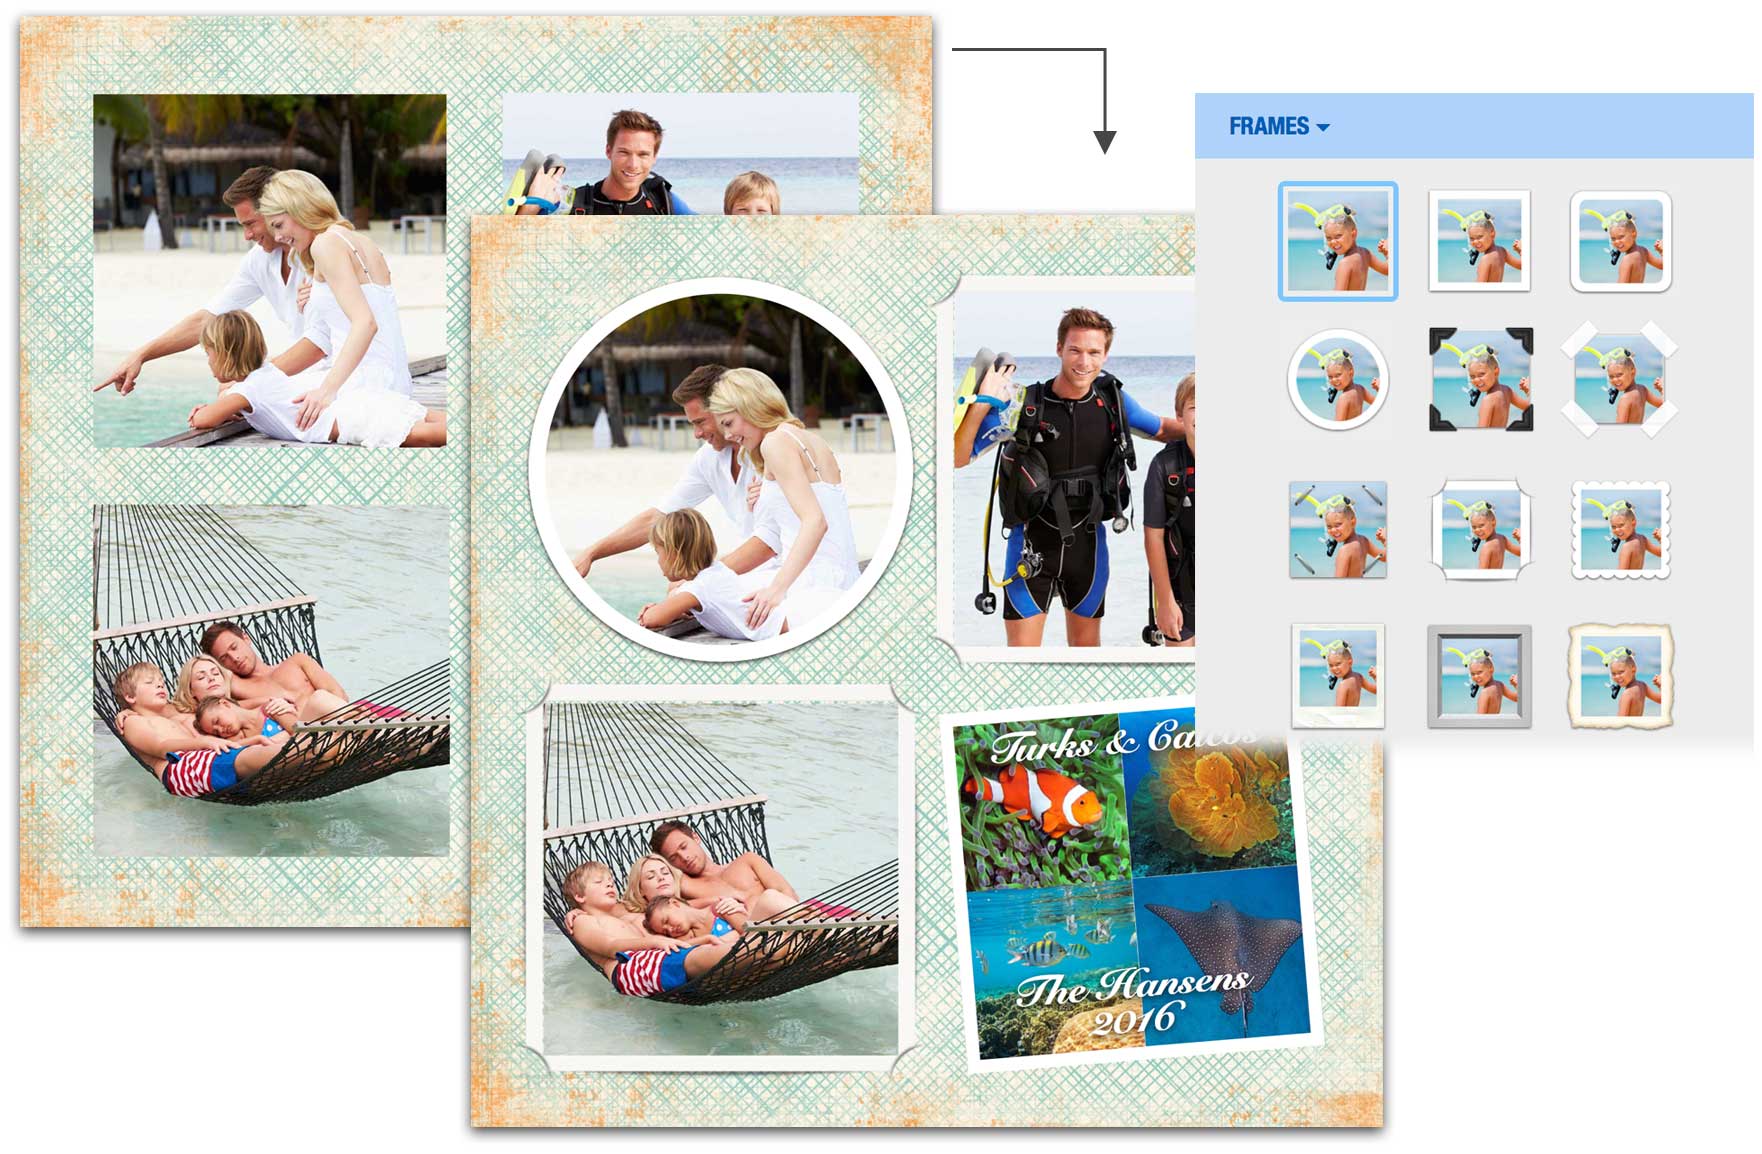 One-click frame examples.